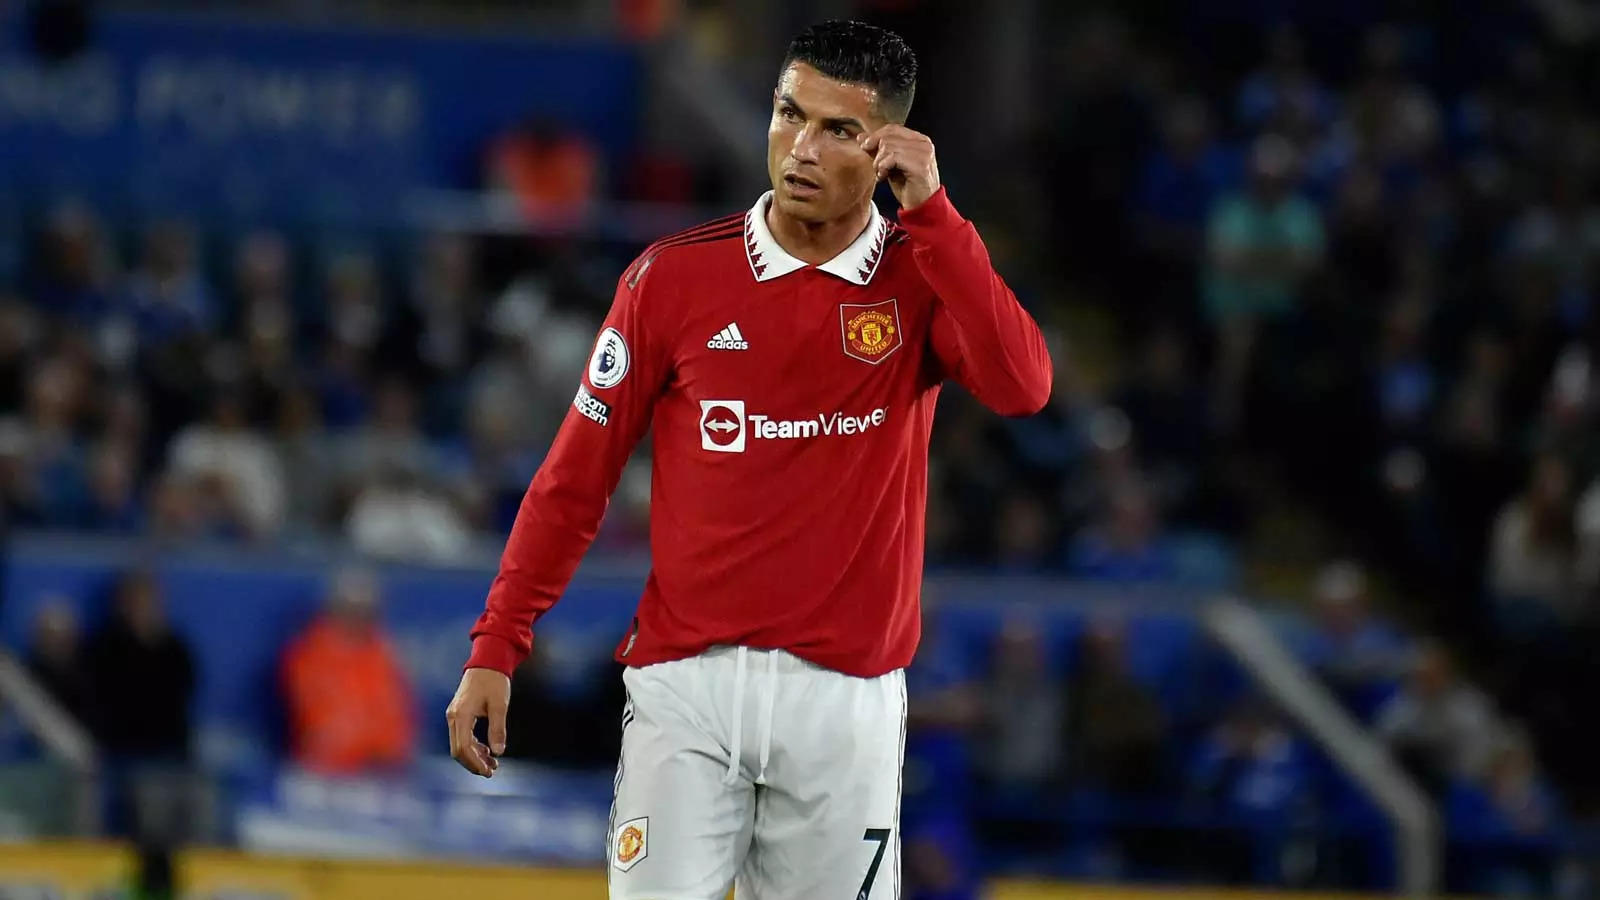 Cristiano Ronaldo didn't leave Manchester United in the summer window